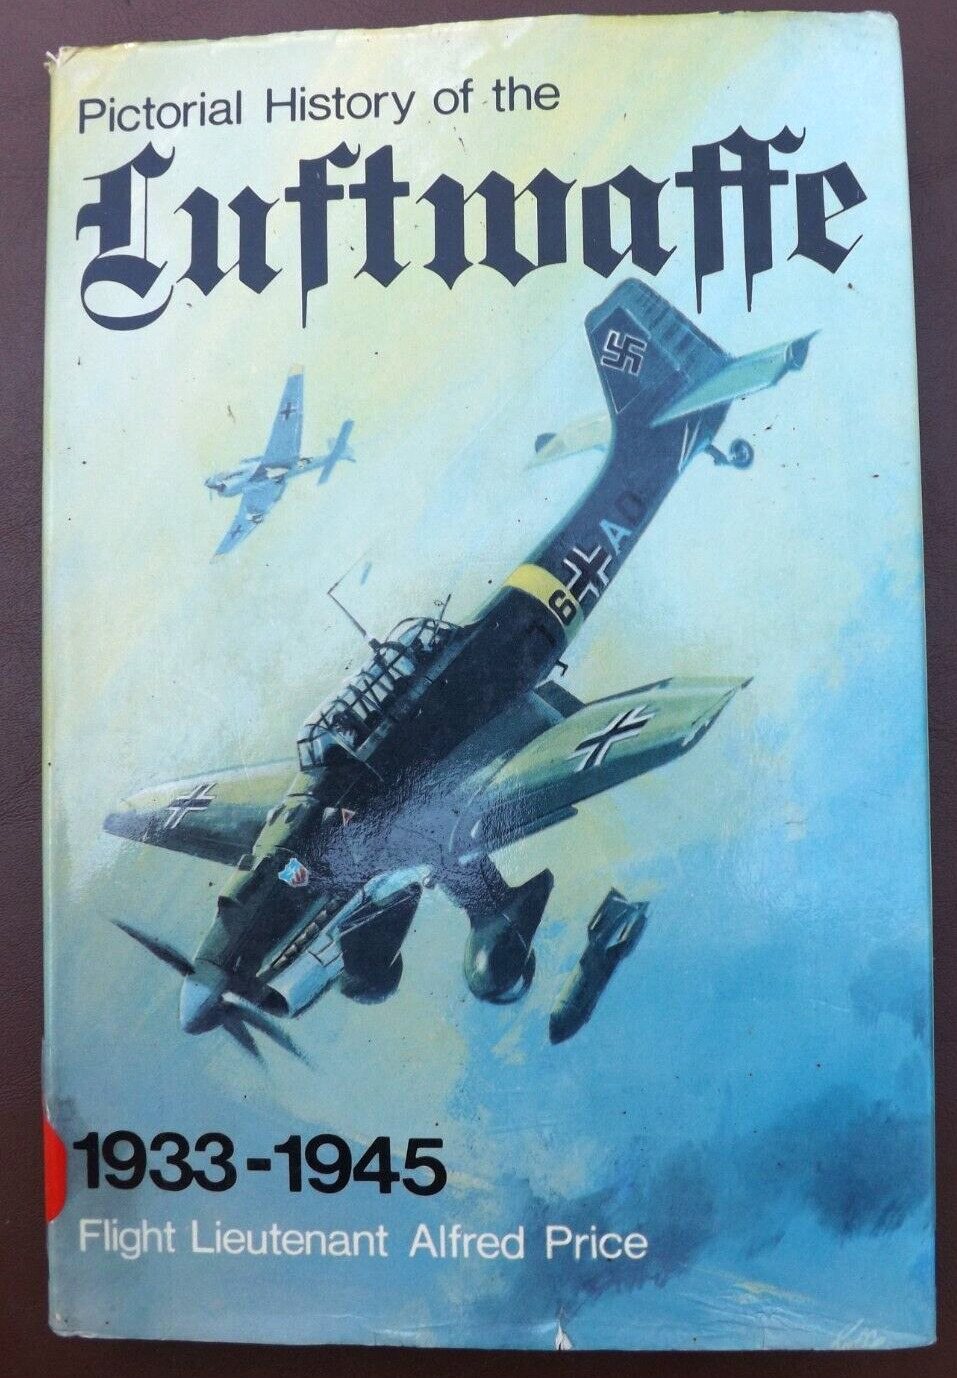 PICTORIAL HISTORY OF THE LUFTWAFFE by A. PRICE SIGNED AUTOGRAPH by HANNA REITSCH